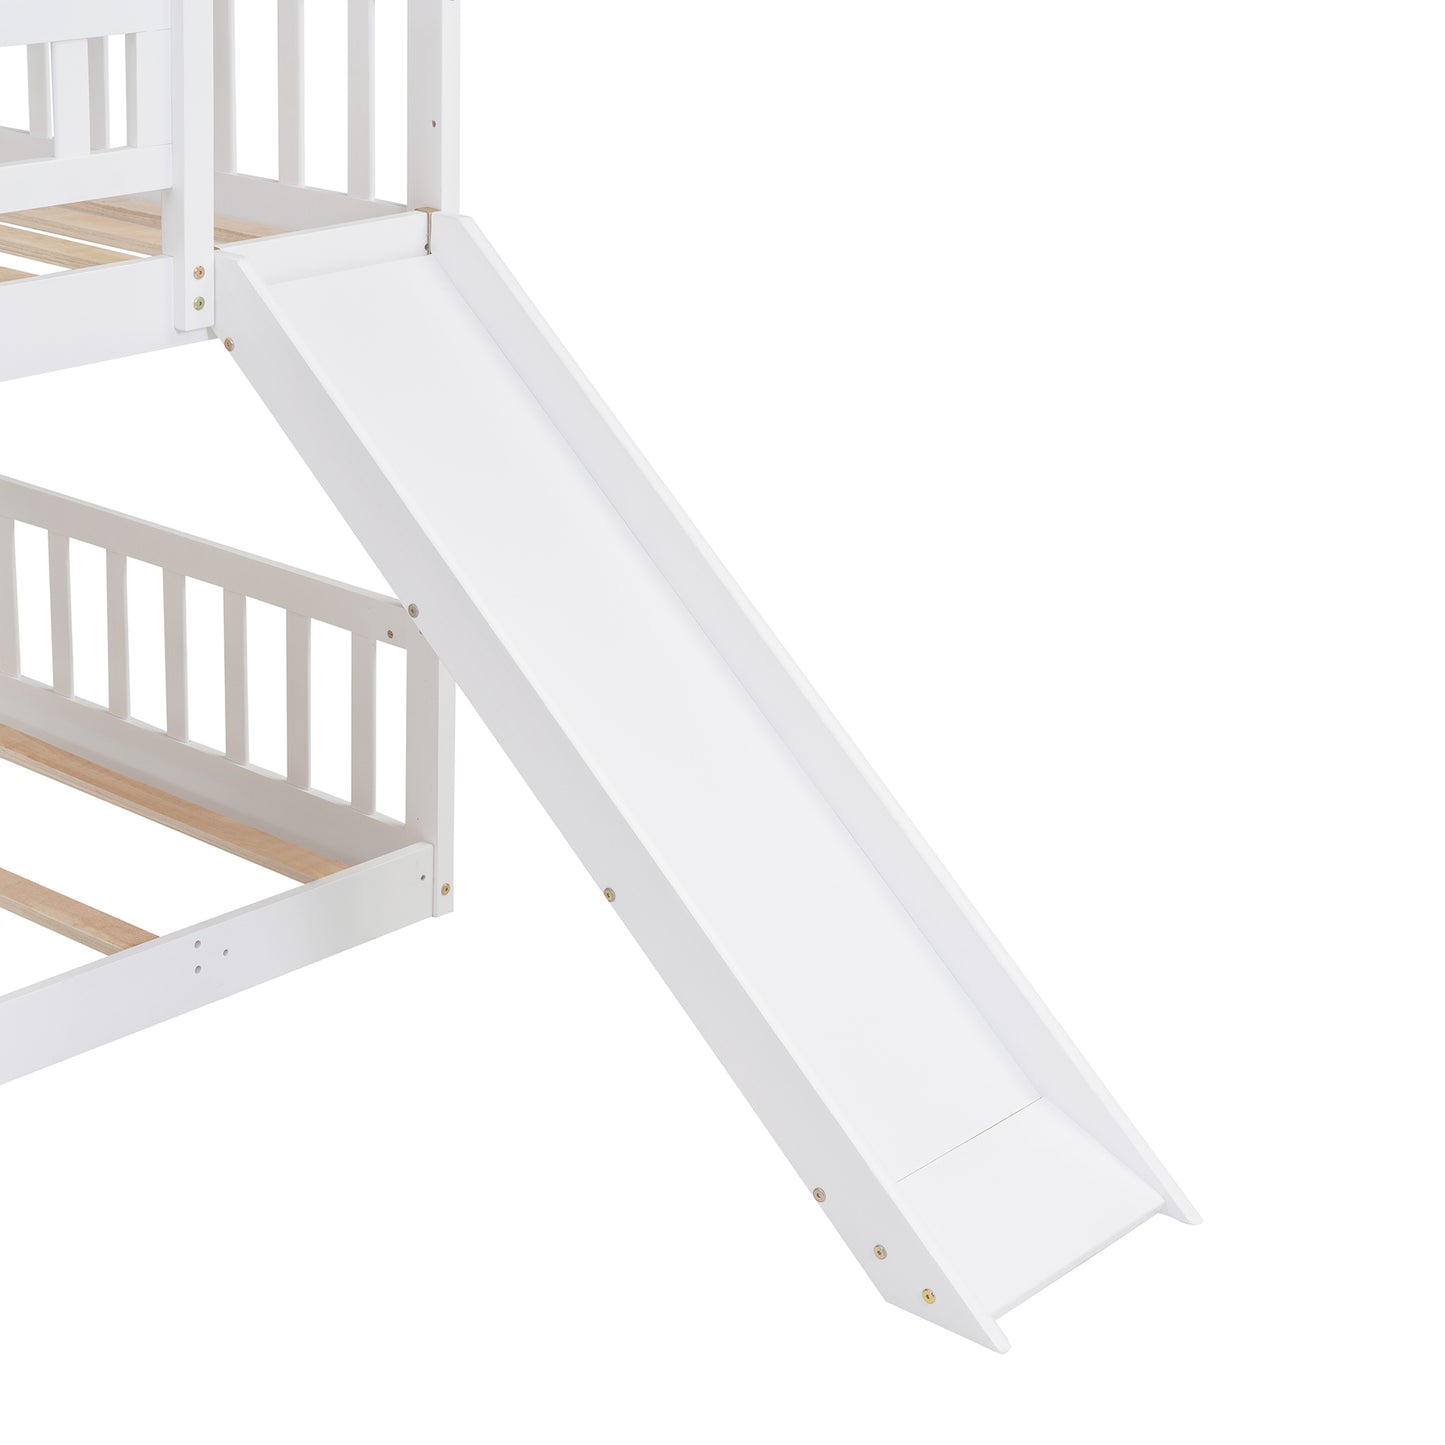 Triple Bunk Bed with Slide and Ladder for Kids, White Finish